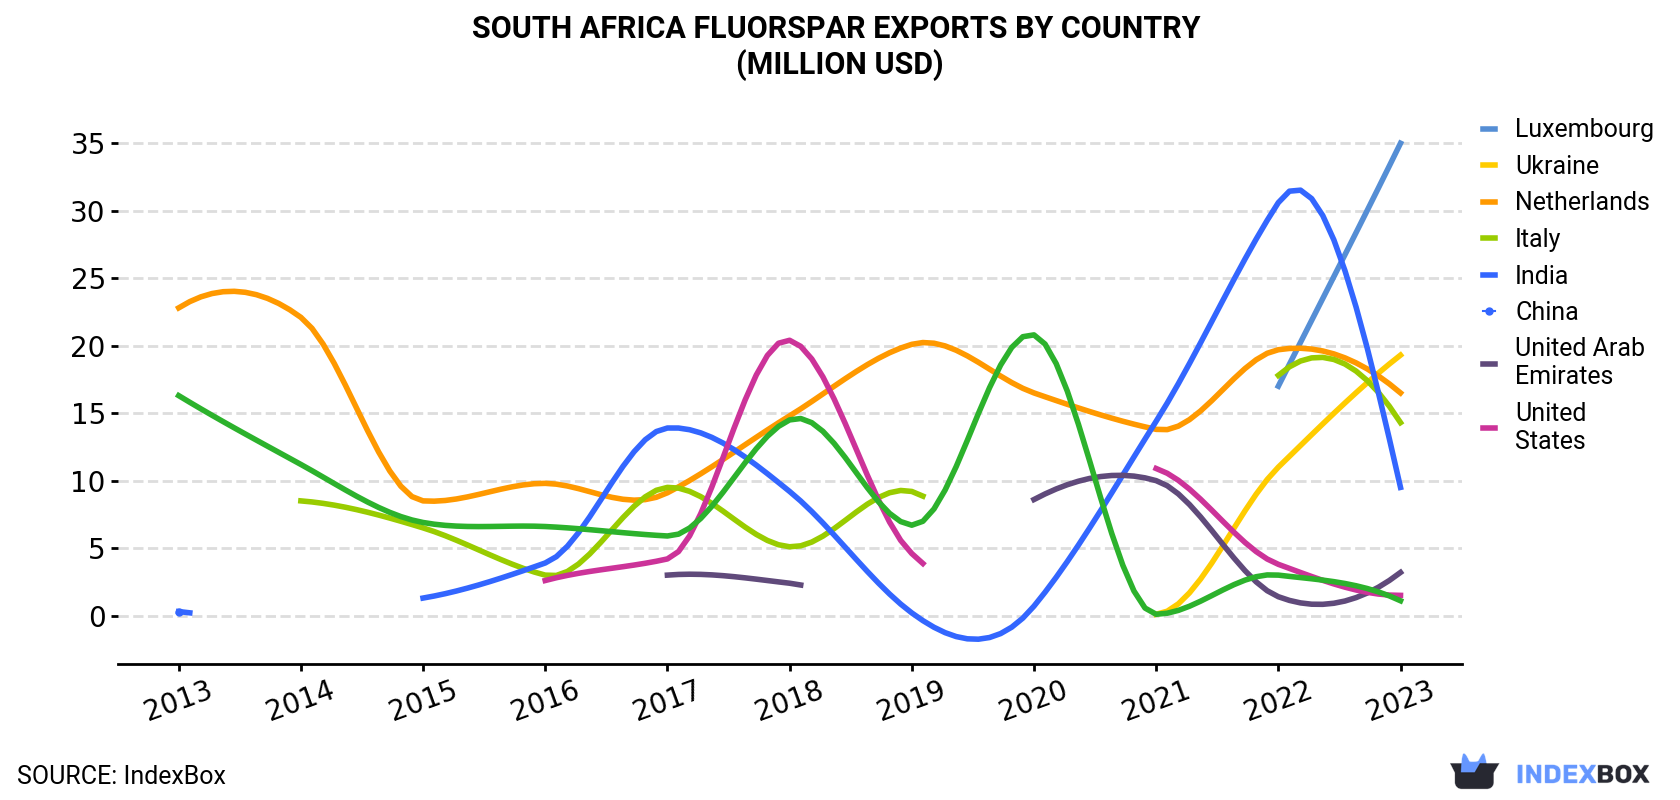 South Africa Fluorspar Exports By Country (Million USD)